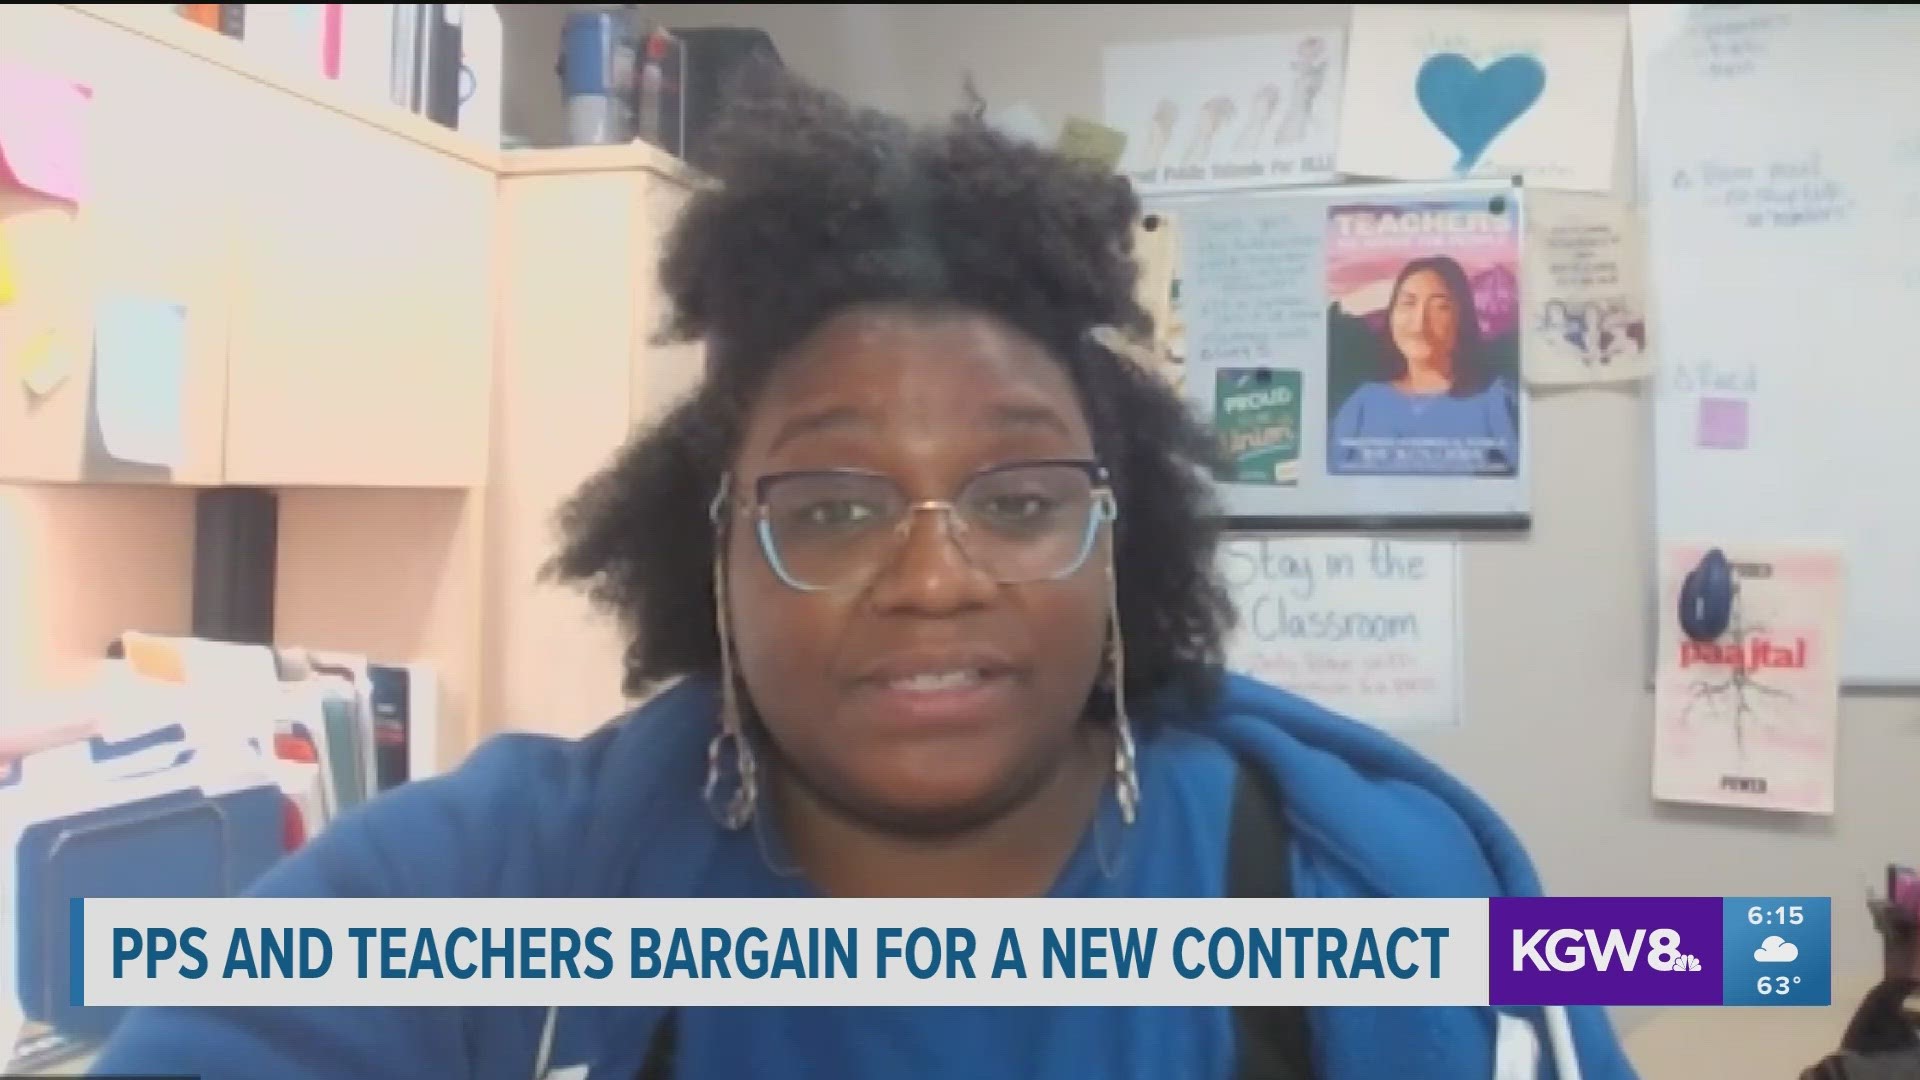 Educator pay is the biggest sticking point in the negotiations, along with class sizes and teacher prep time.